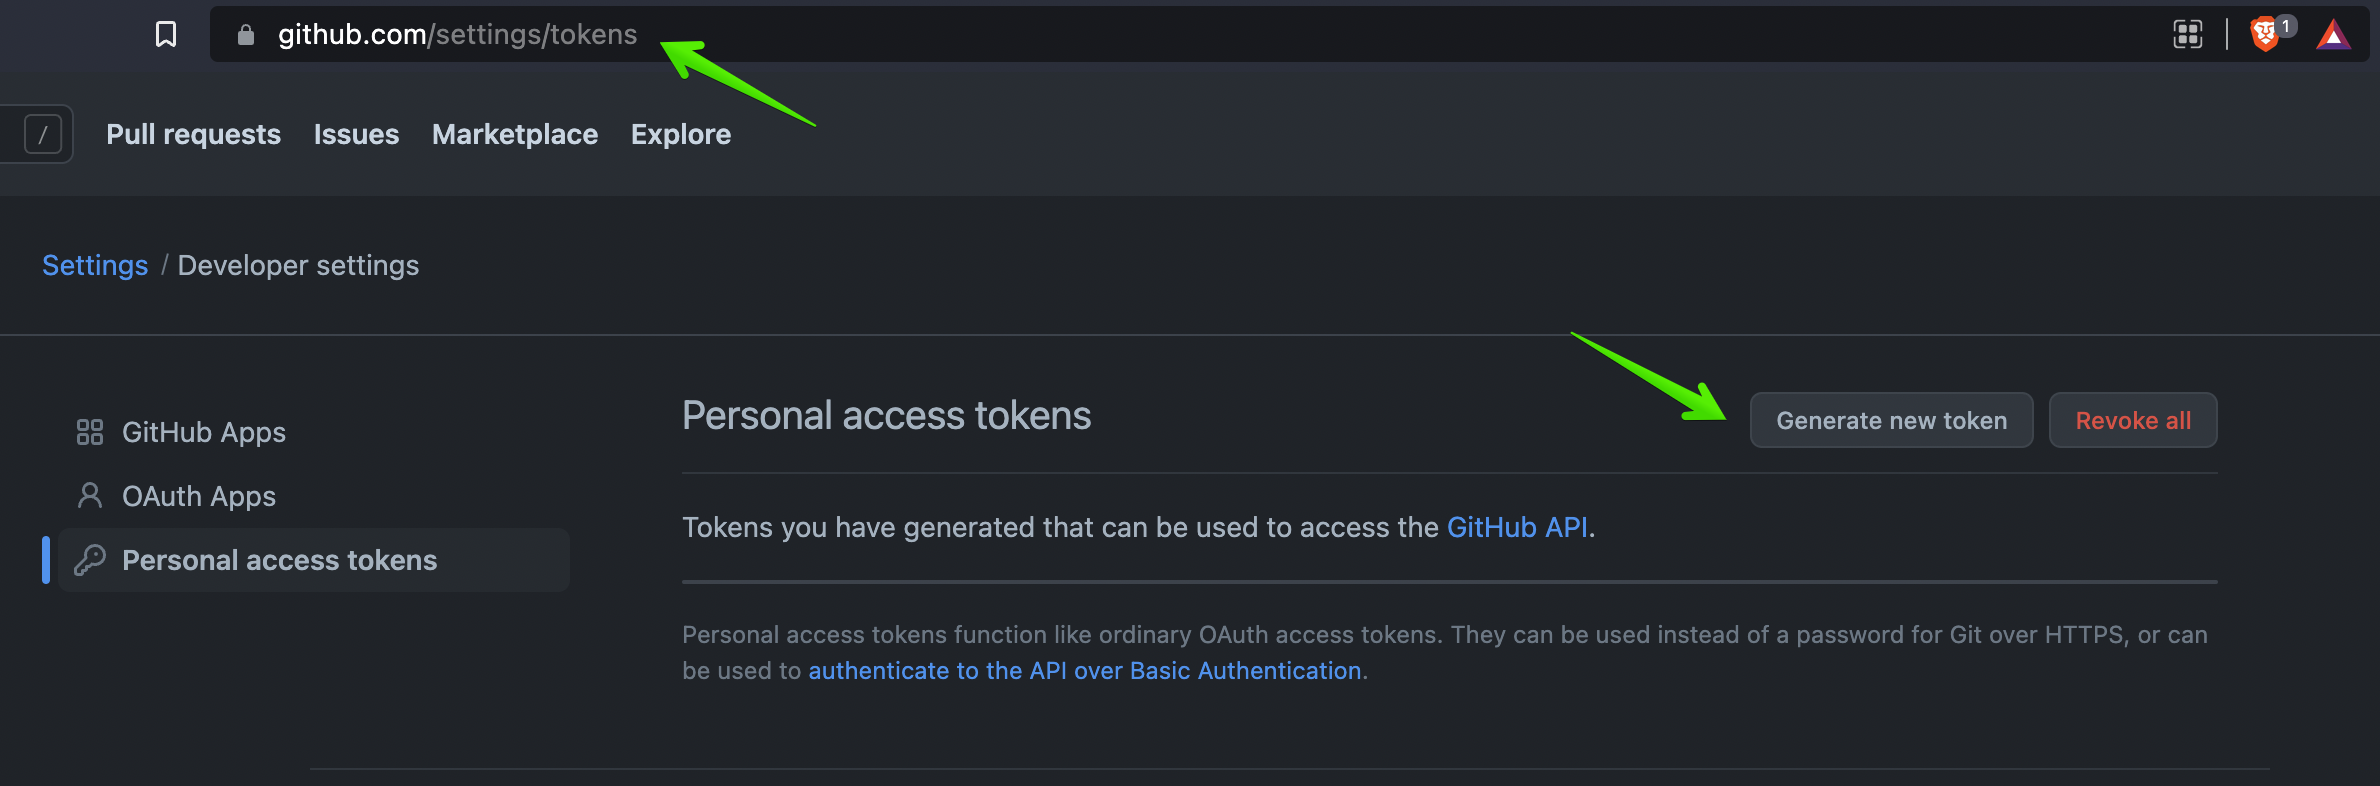 new_access_token.png